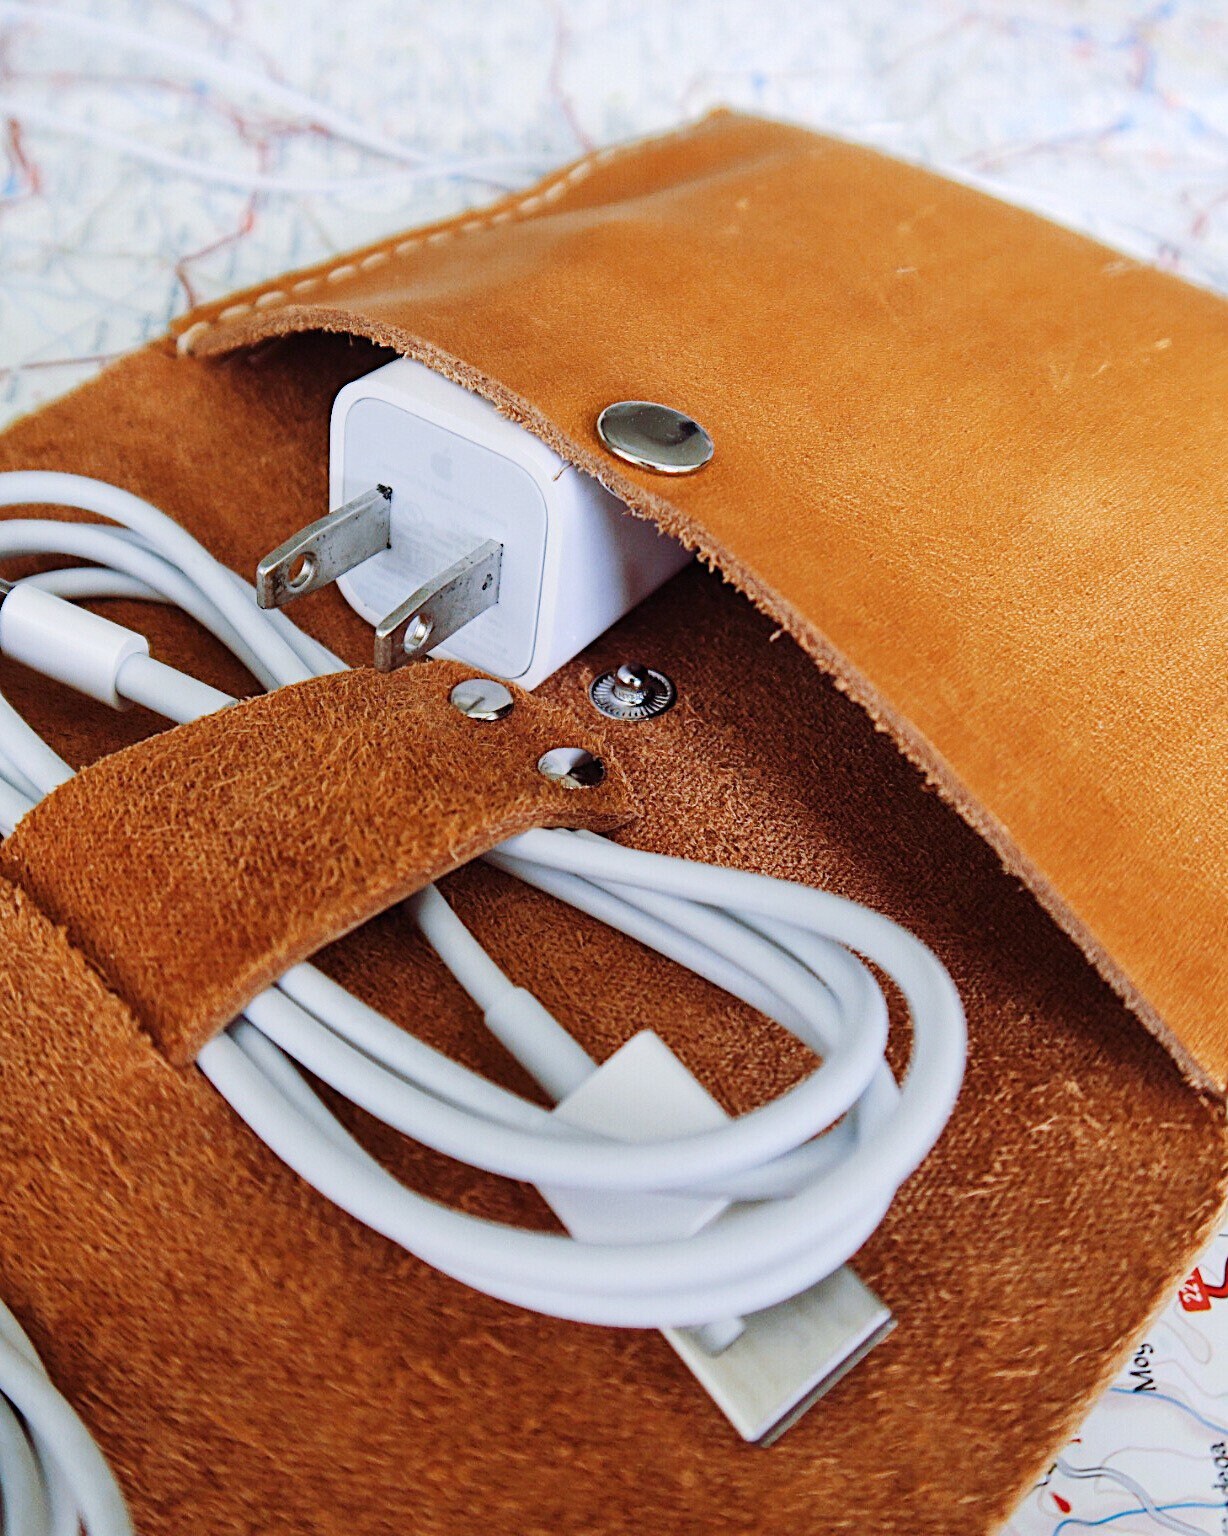 Leather Cord Organizer Wrap Holder Cable Bag Roll Holder 